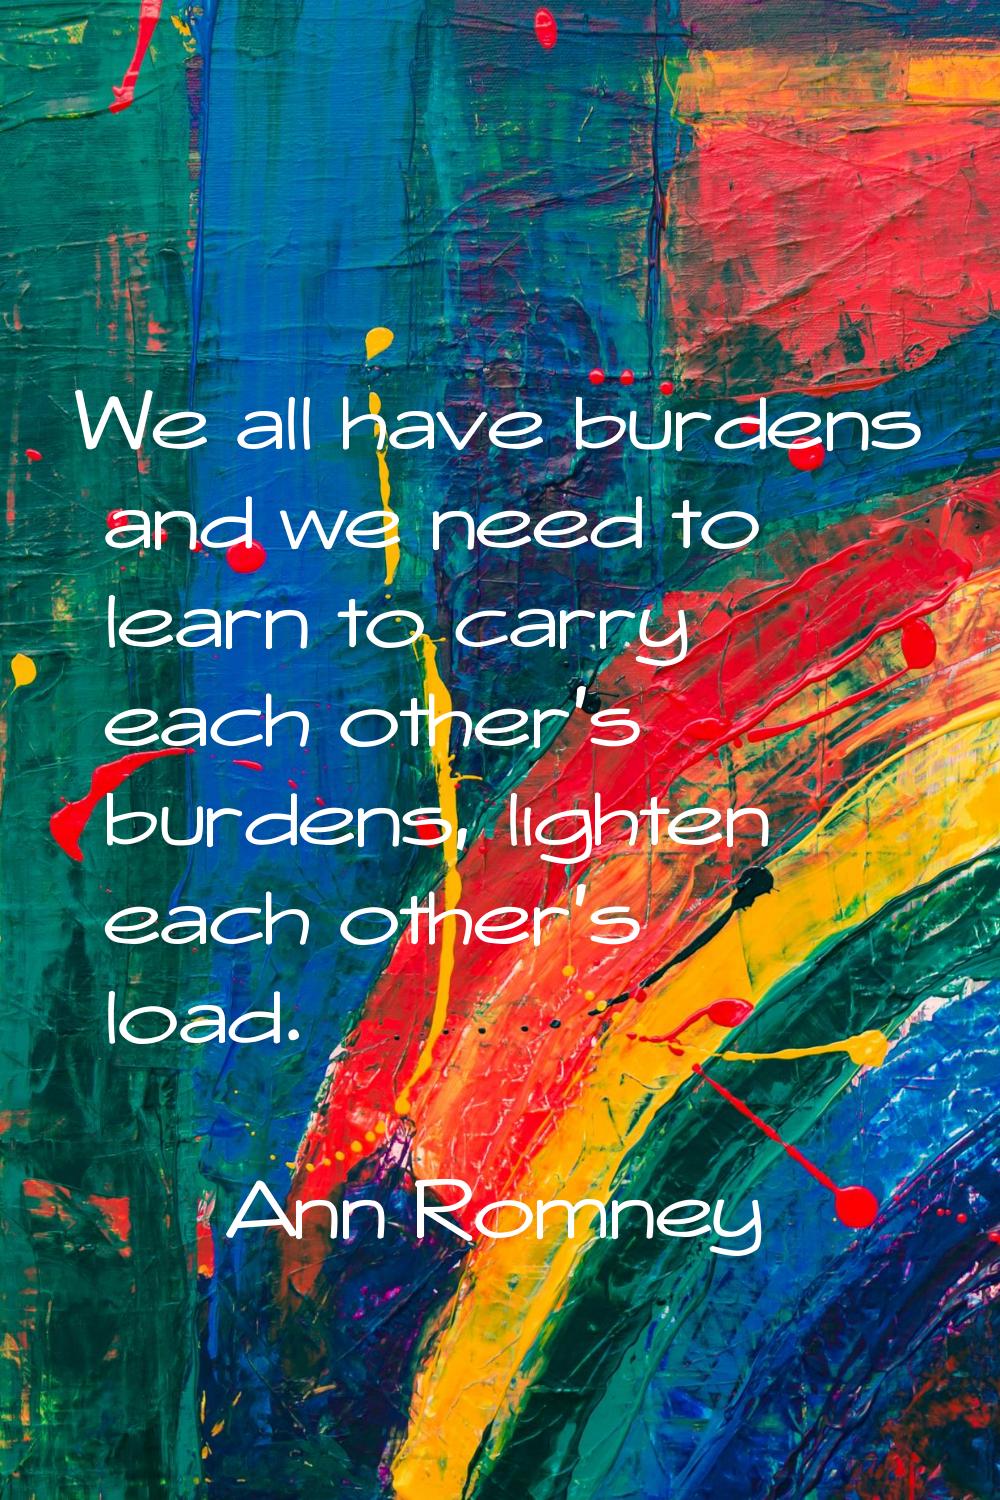 We all have burdens and we need to learn to carry each other's burdens, lighten each other's load.